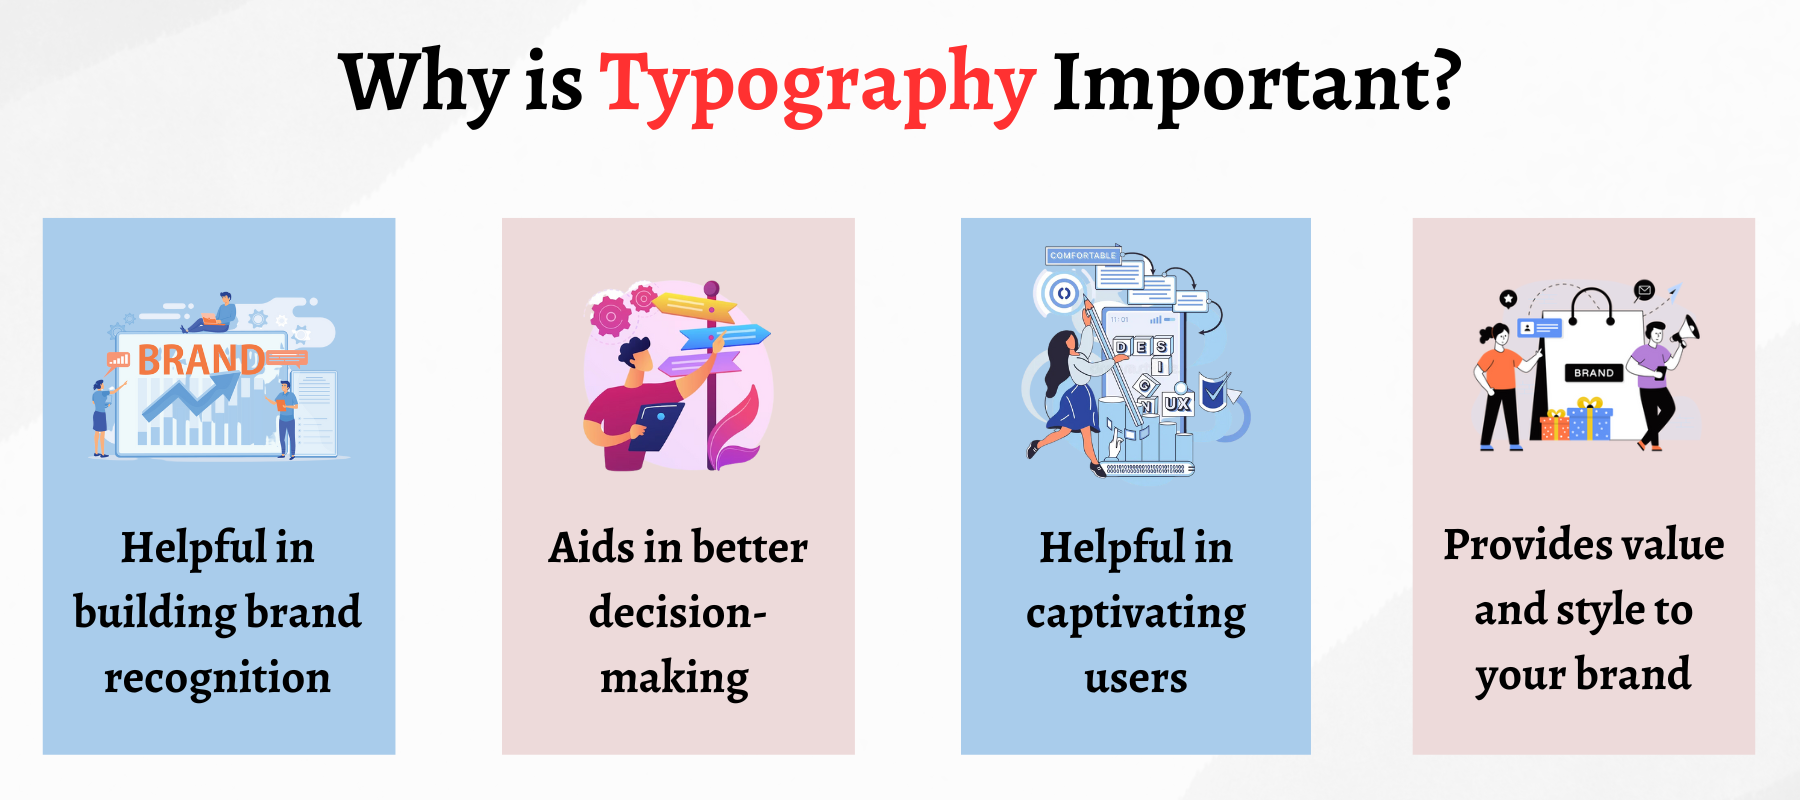 Why is Typography Important?